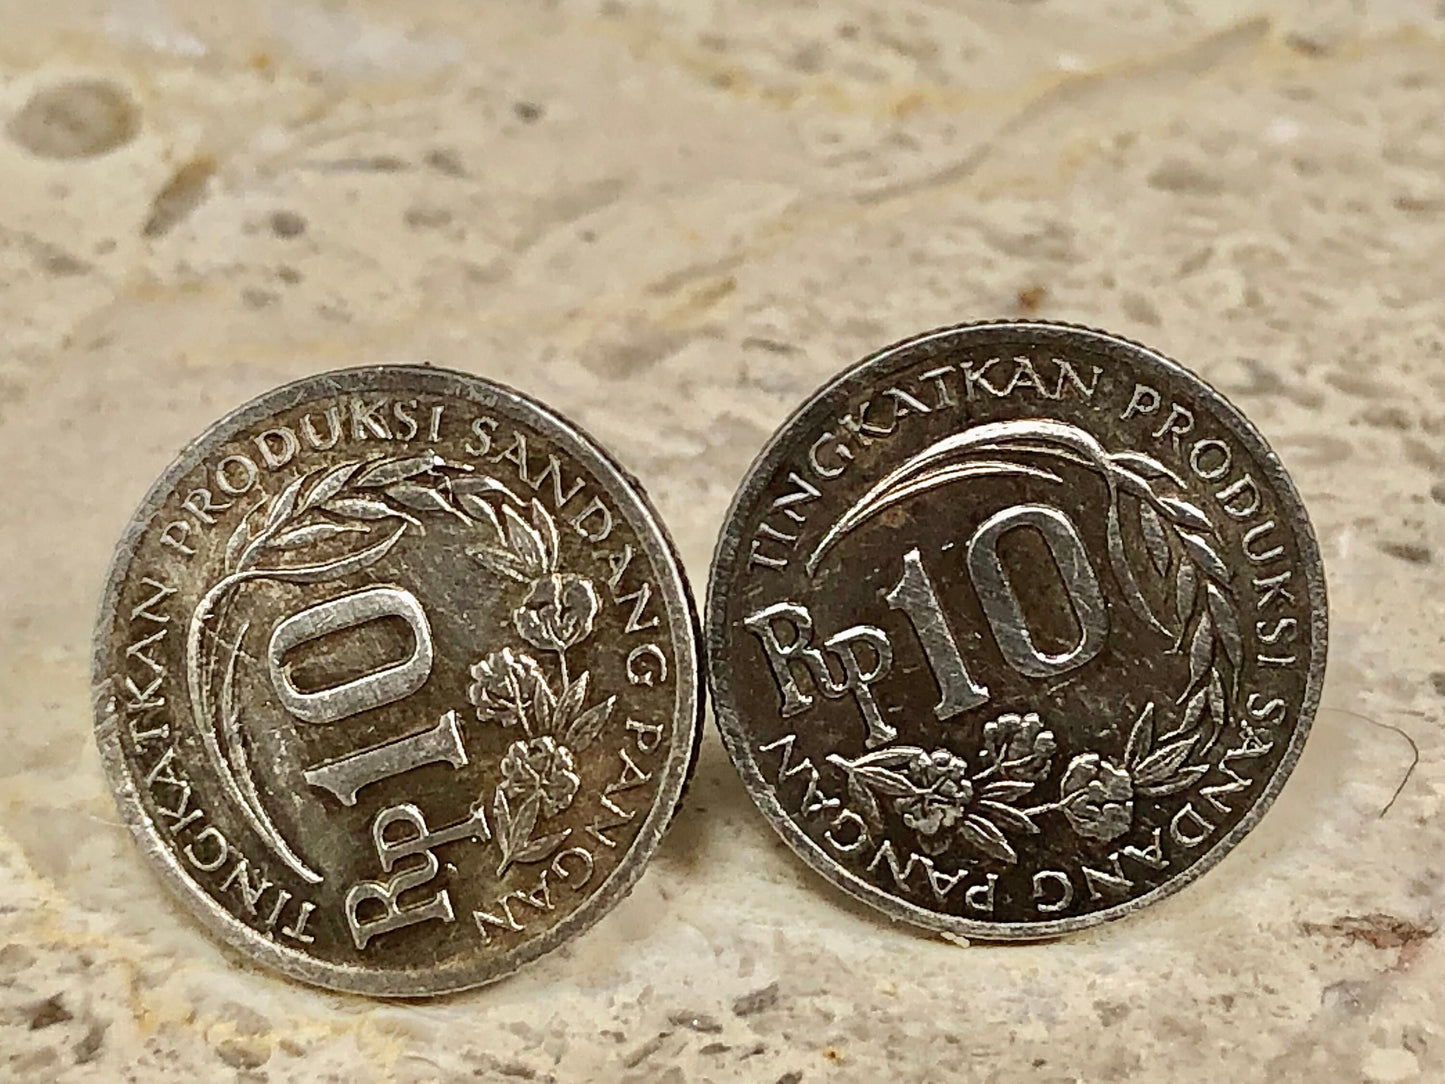 Indonesia 10 rupiah Coin Stud Earrings Set Indonesian Vintage Handmade Jewelry Gift Friend Charm For Him Her World Coin Collector